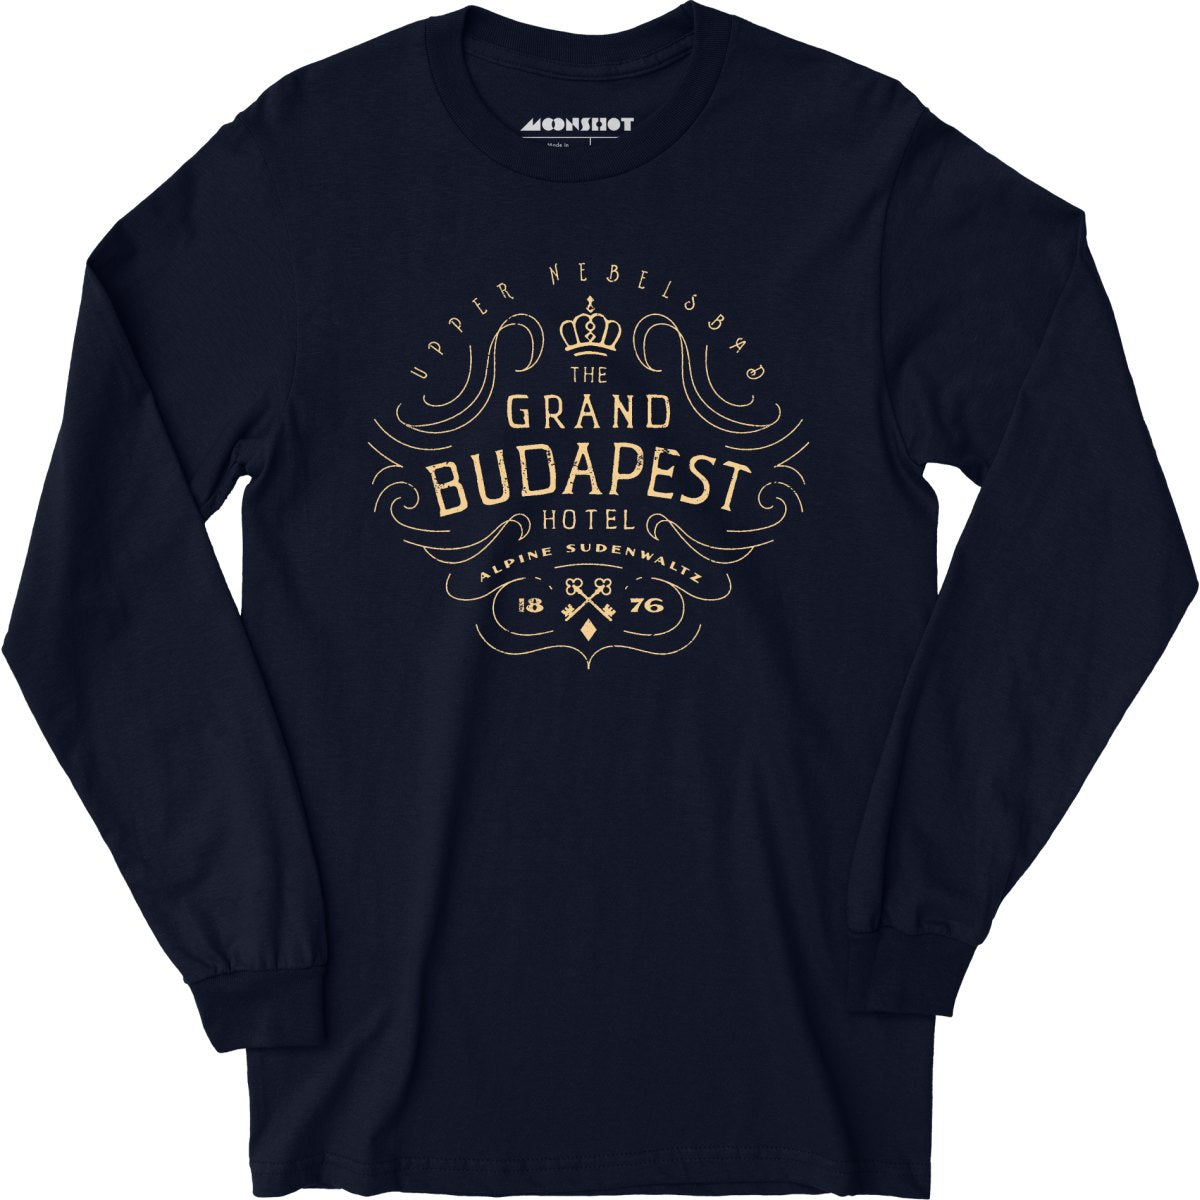 The Grand Budapest Hotel - Long Sleeve T-Shirt